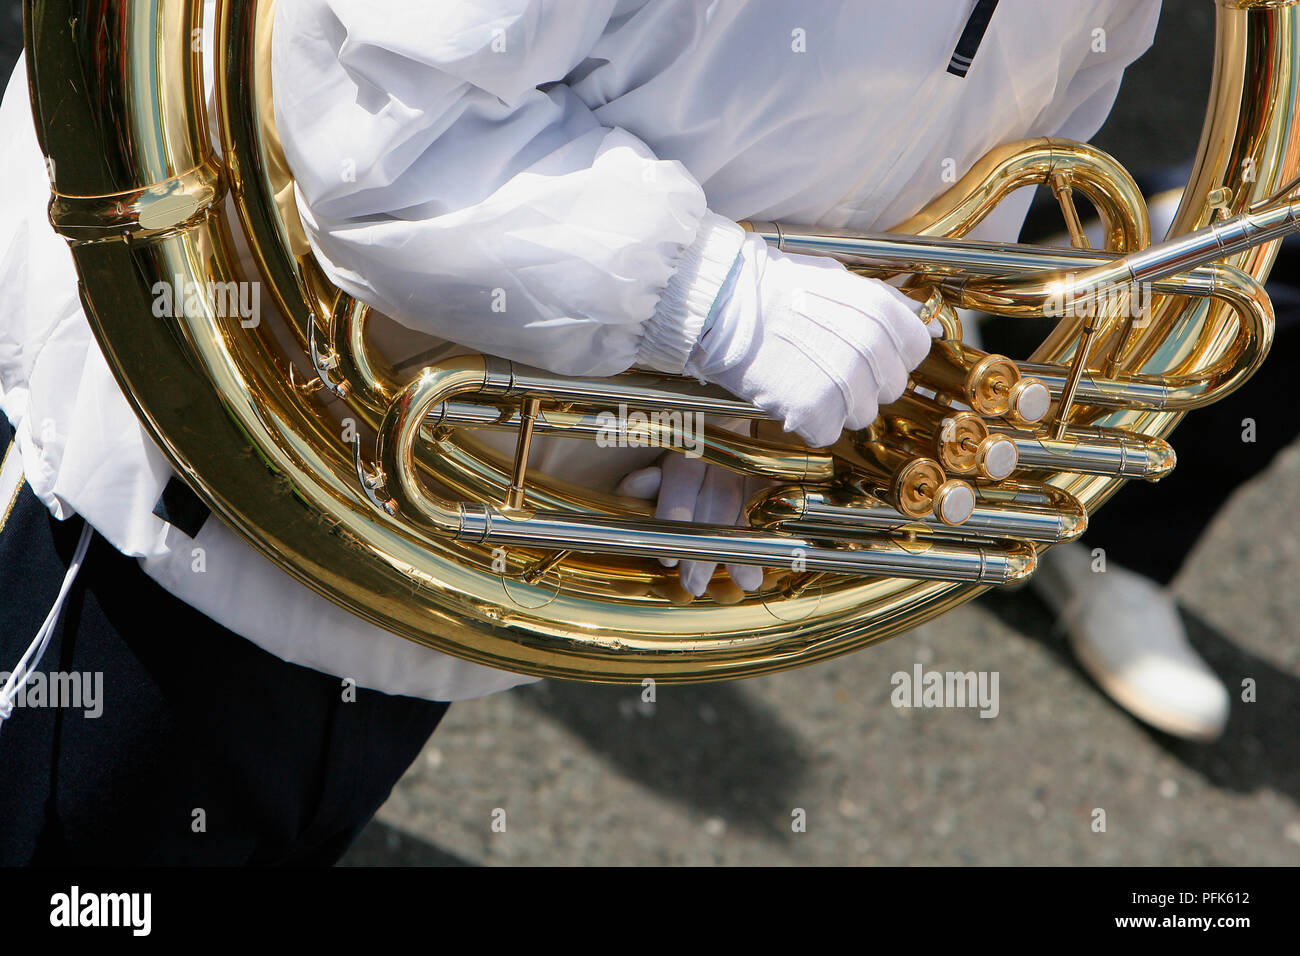 Ireland, Dublin, St Patrick's Day celebrations, musician with sousaphone round the shoulders, close-up Stock Photo